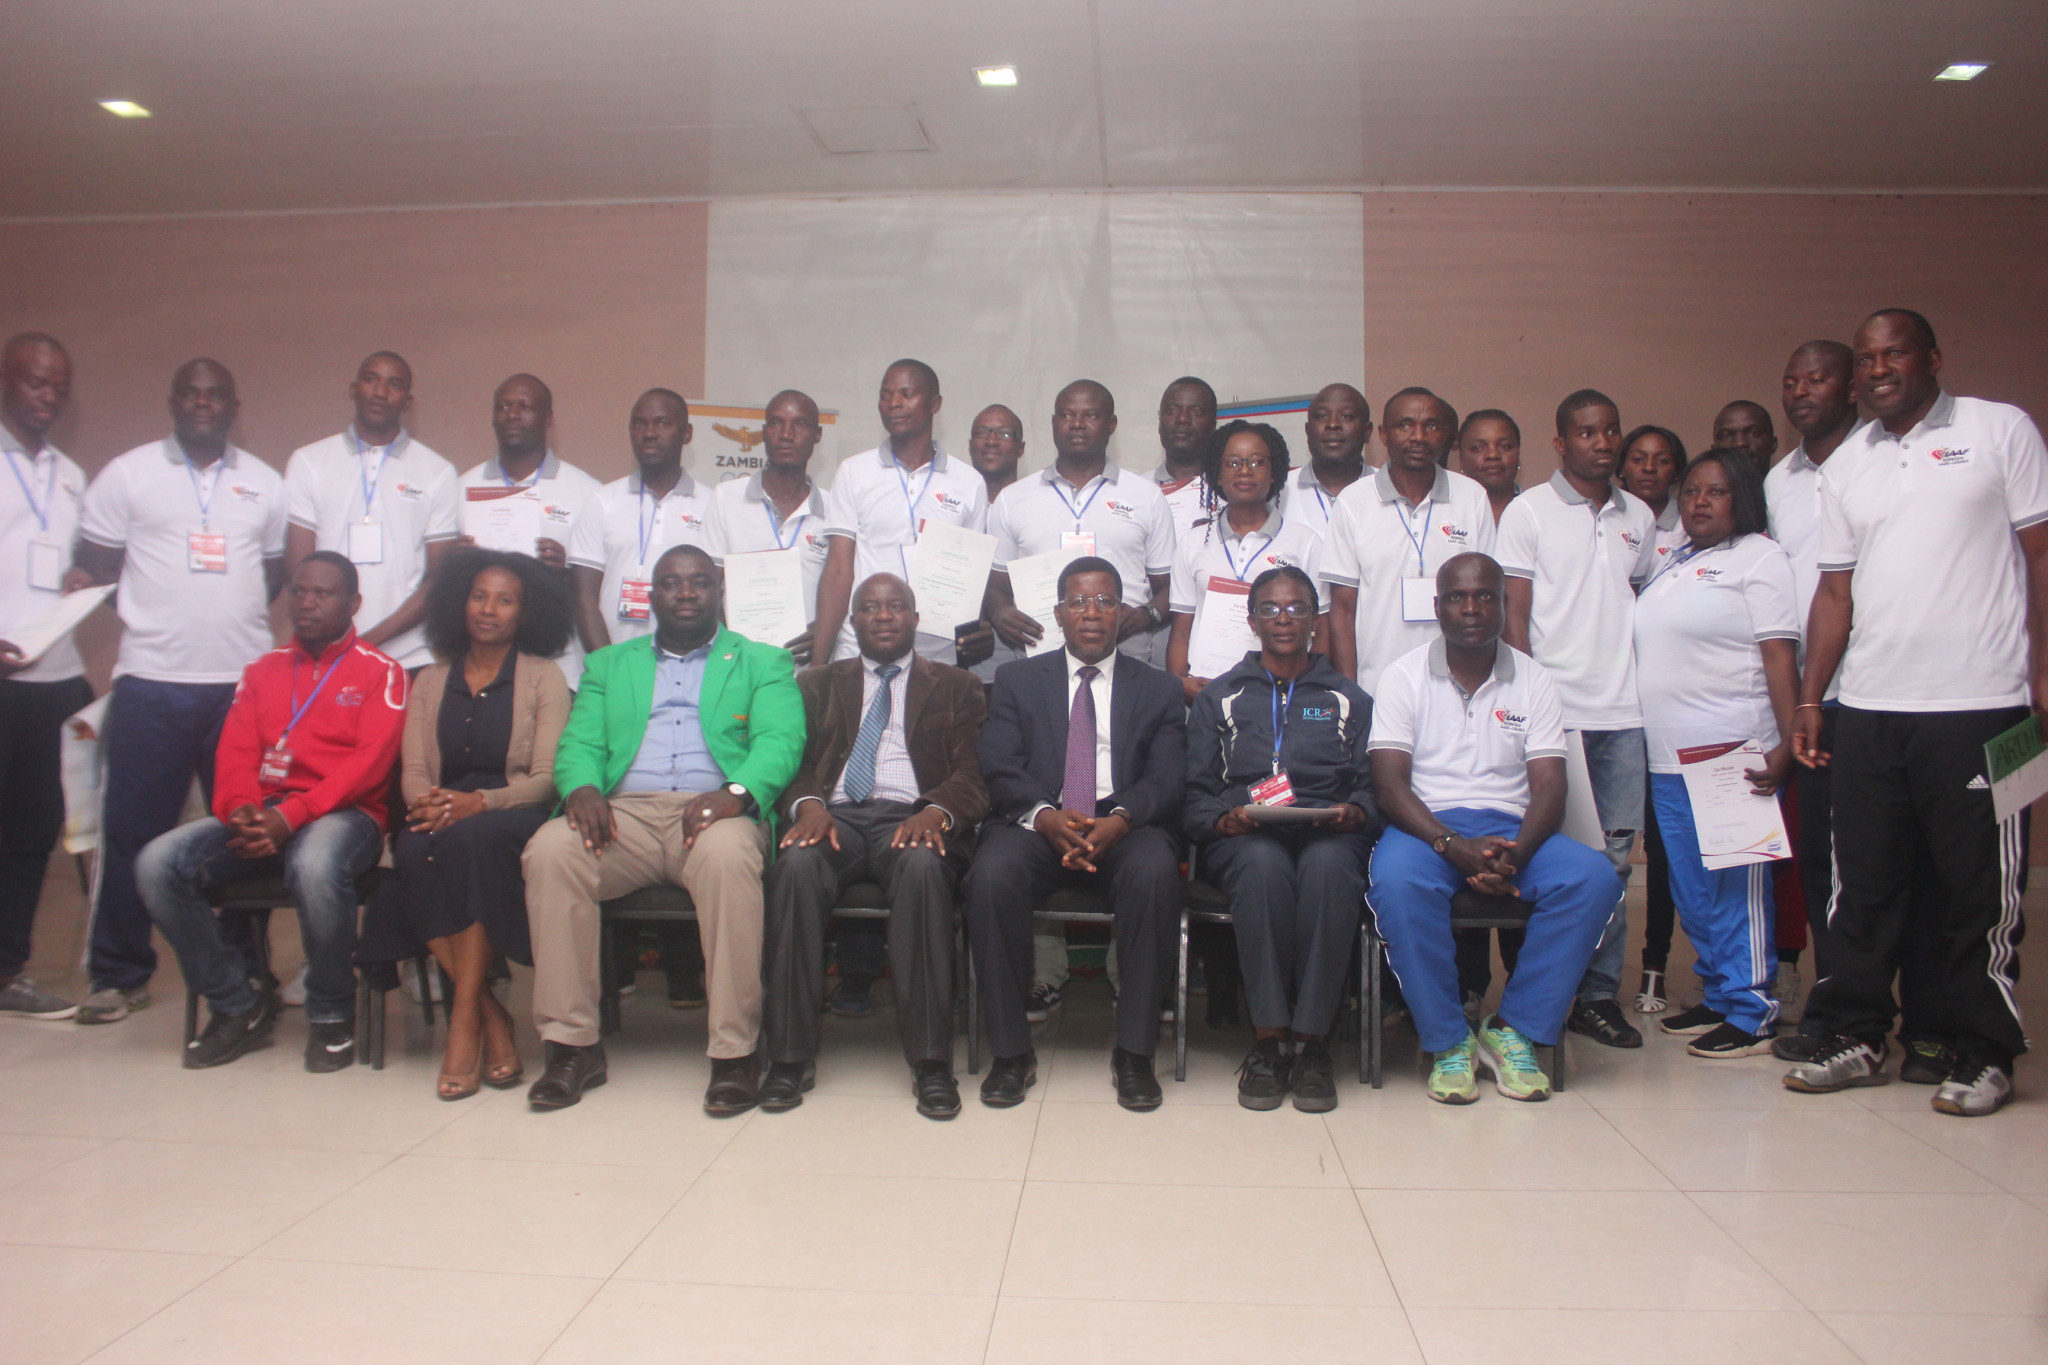 There were 24 coaches from across Zambia who took part in the Zambia Amateur Athletics Association training programme in Lusaka ©NOCZ 